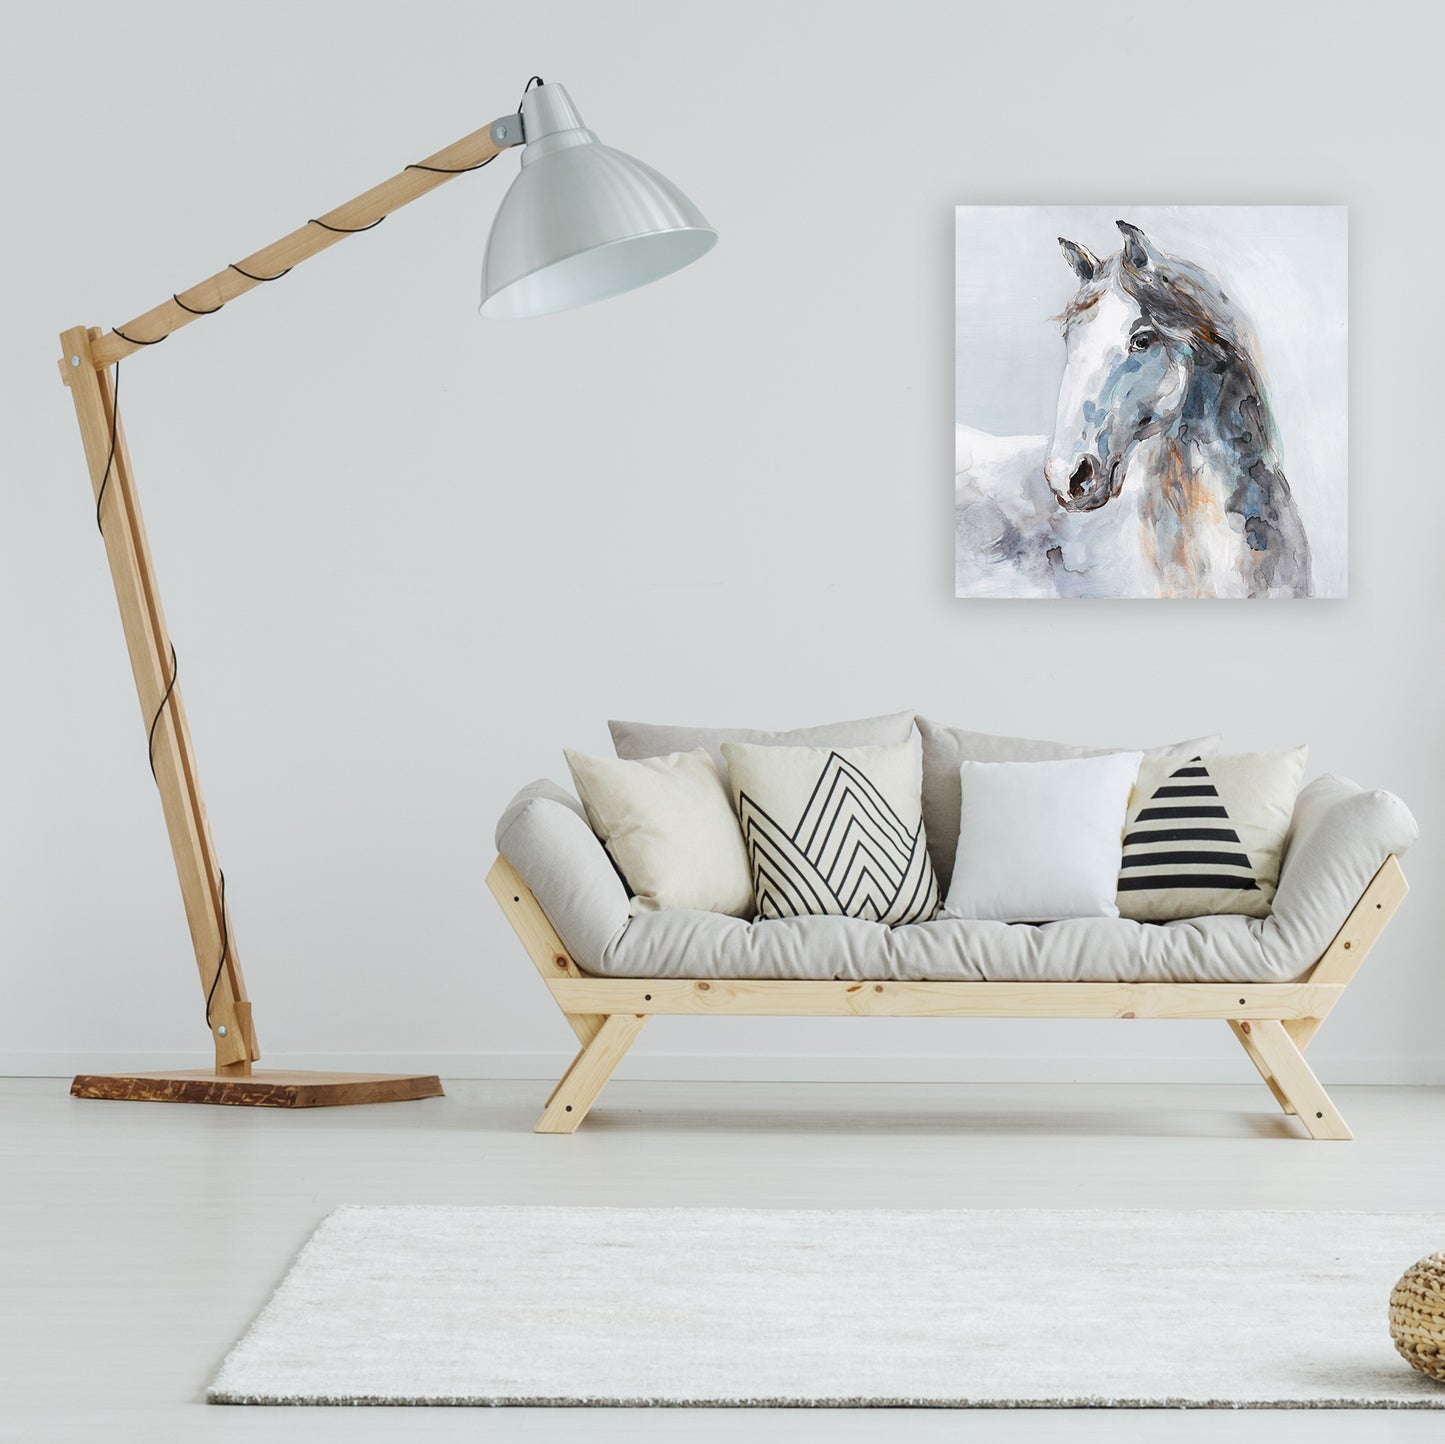 White horse II of abstract art, Oil painting Canvas wall art for living room, bedroom